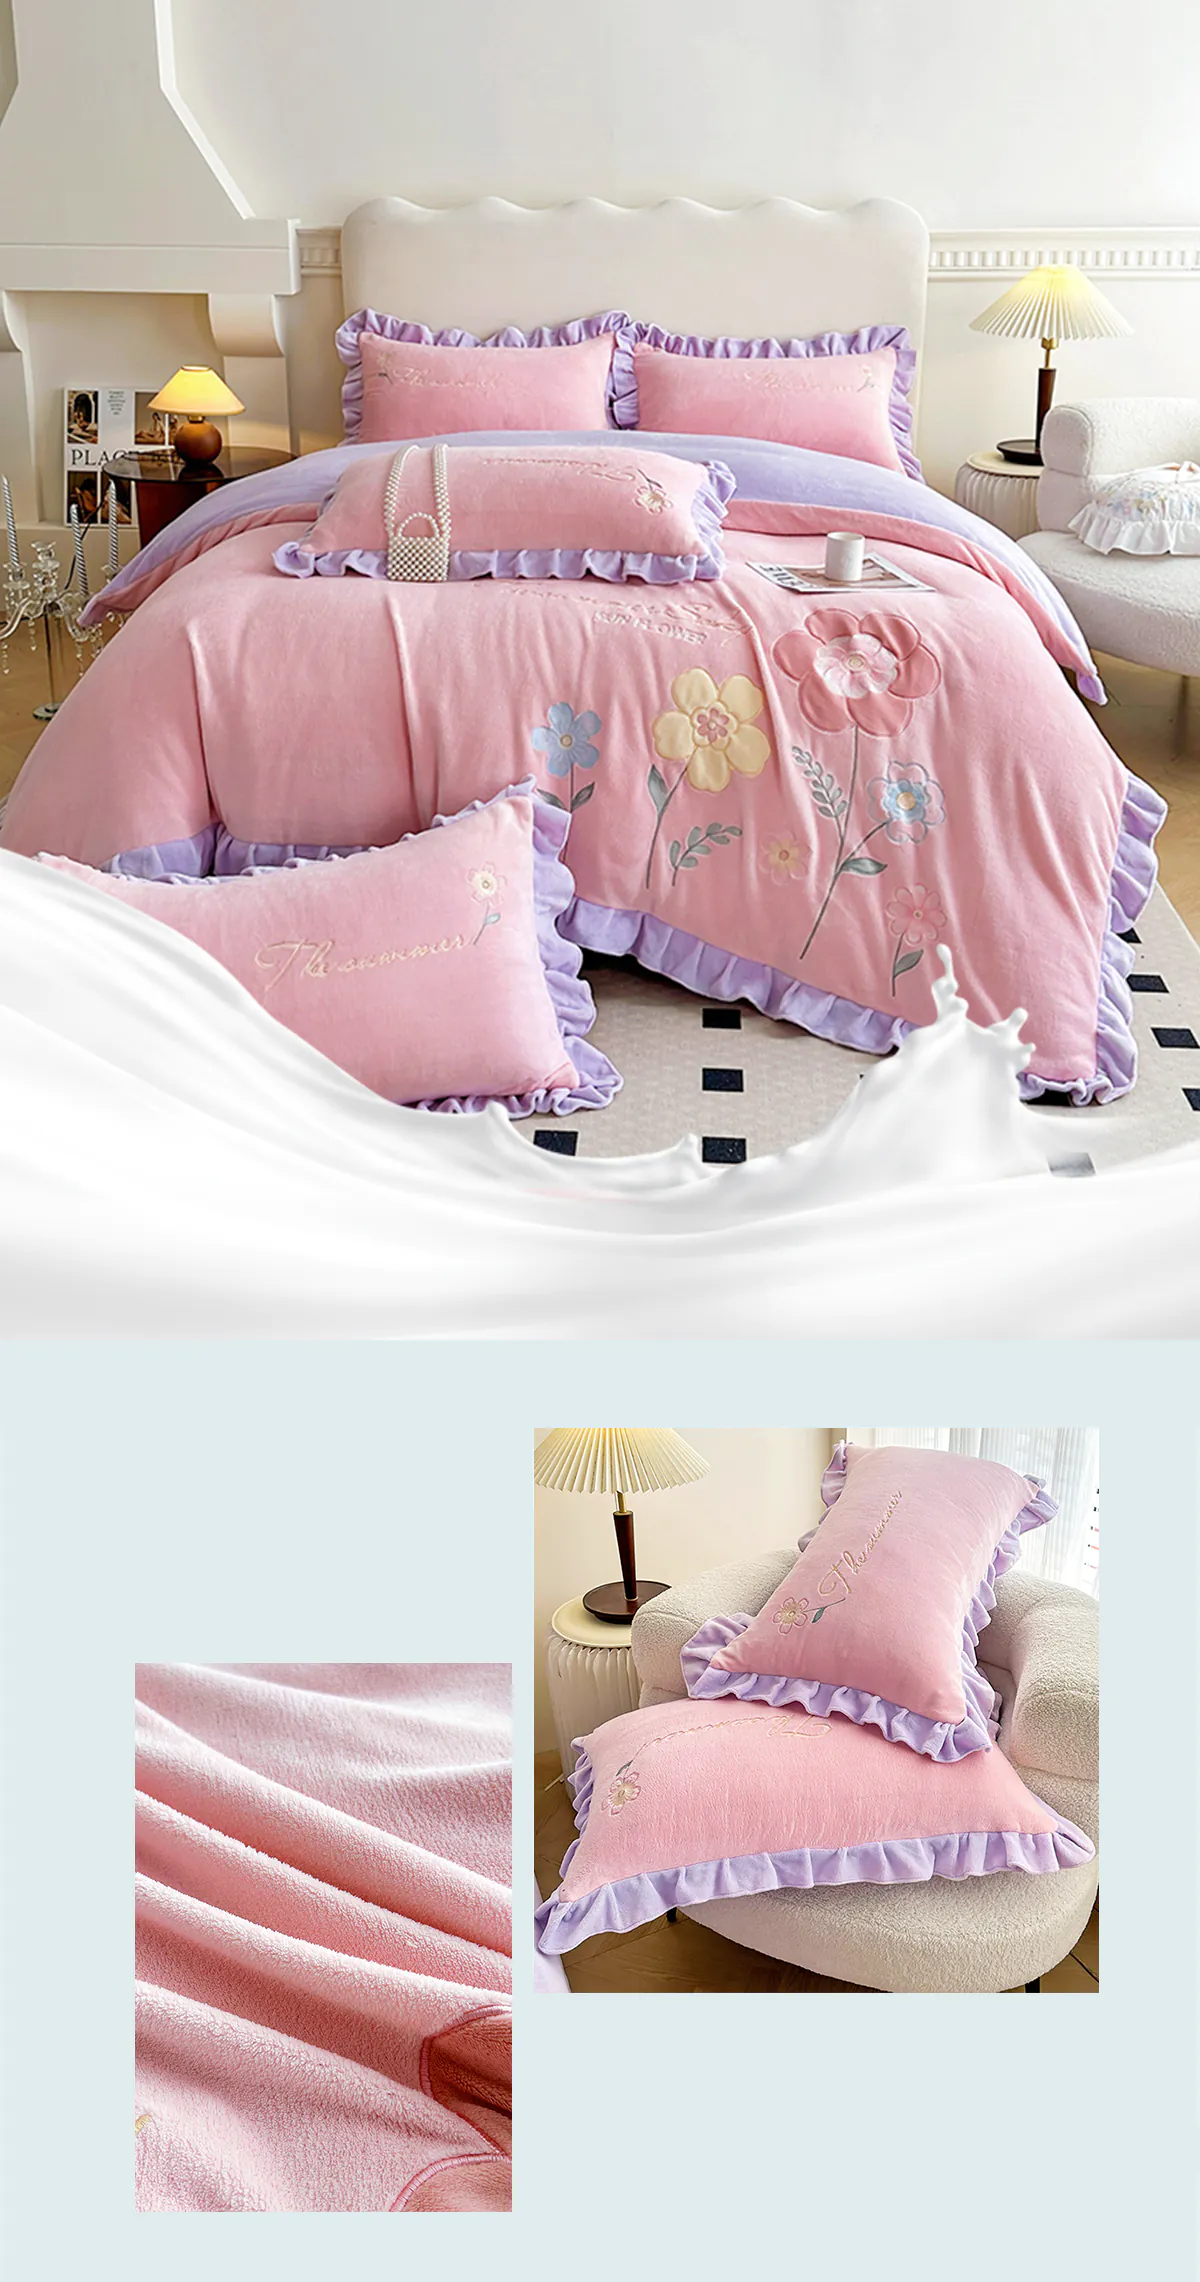 Comfy-Milk-Fiber-Embroidery-Quilt-Cover-Bed-Sheet-Pillowcases-Set23